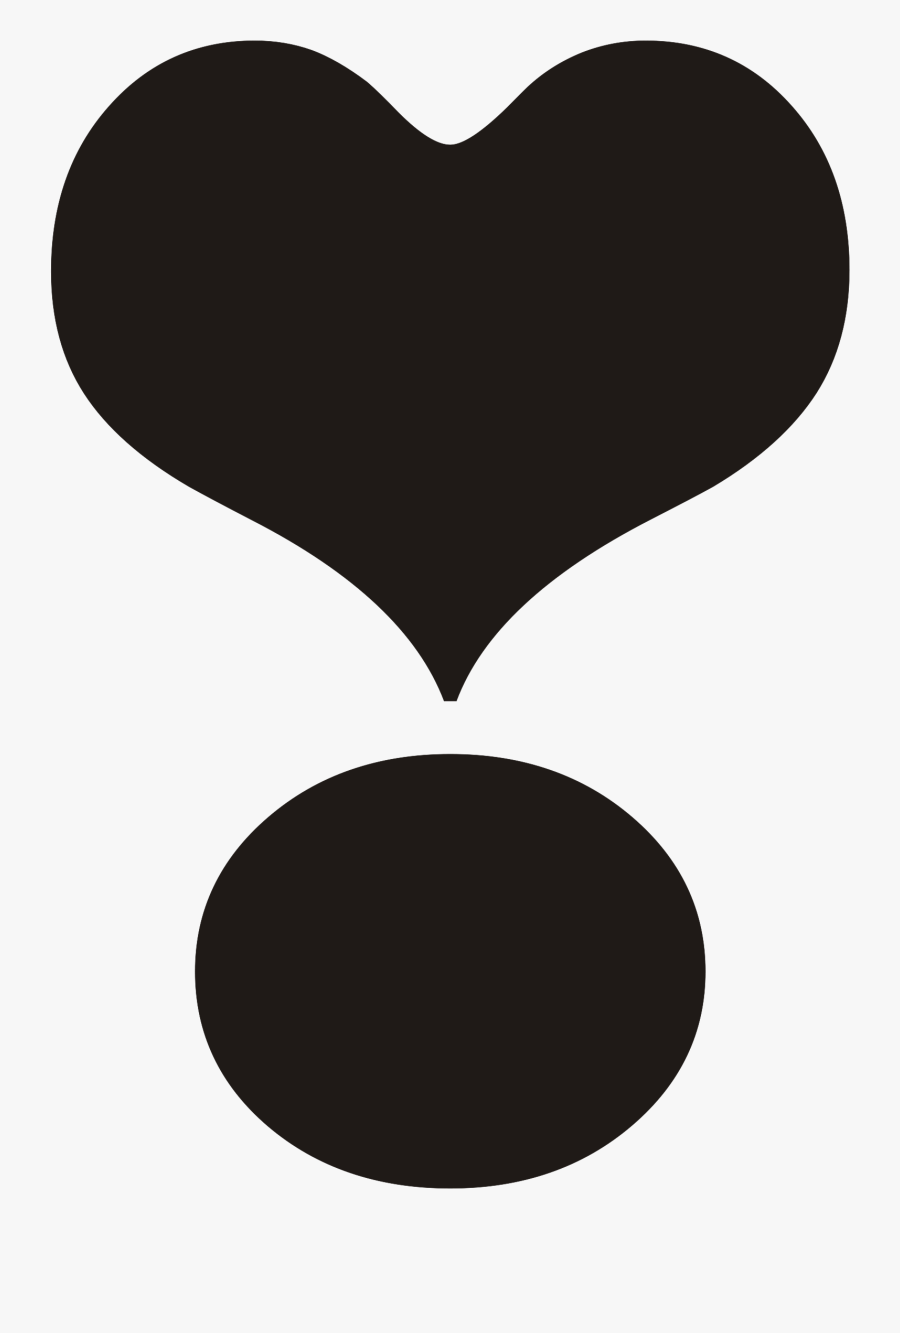 Exclamation Mark Heart Black - Heart Exclamation Point Black, Transparent Clipart